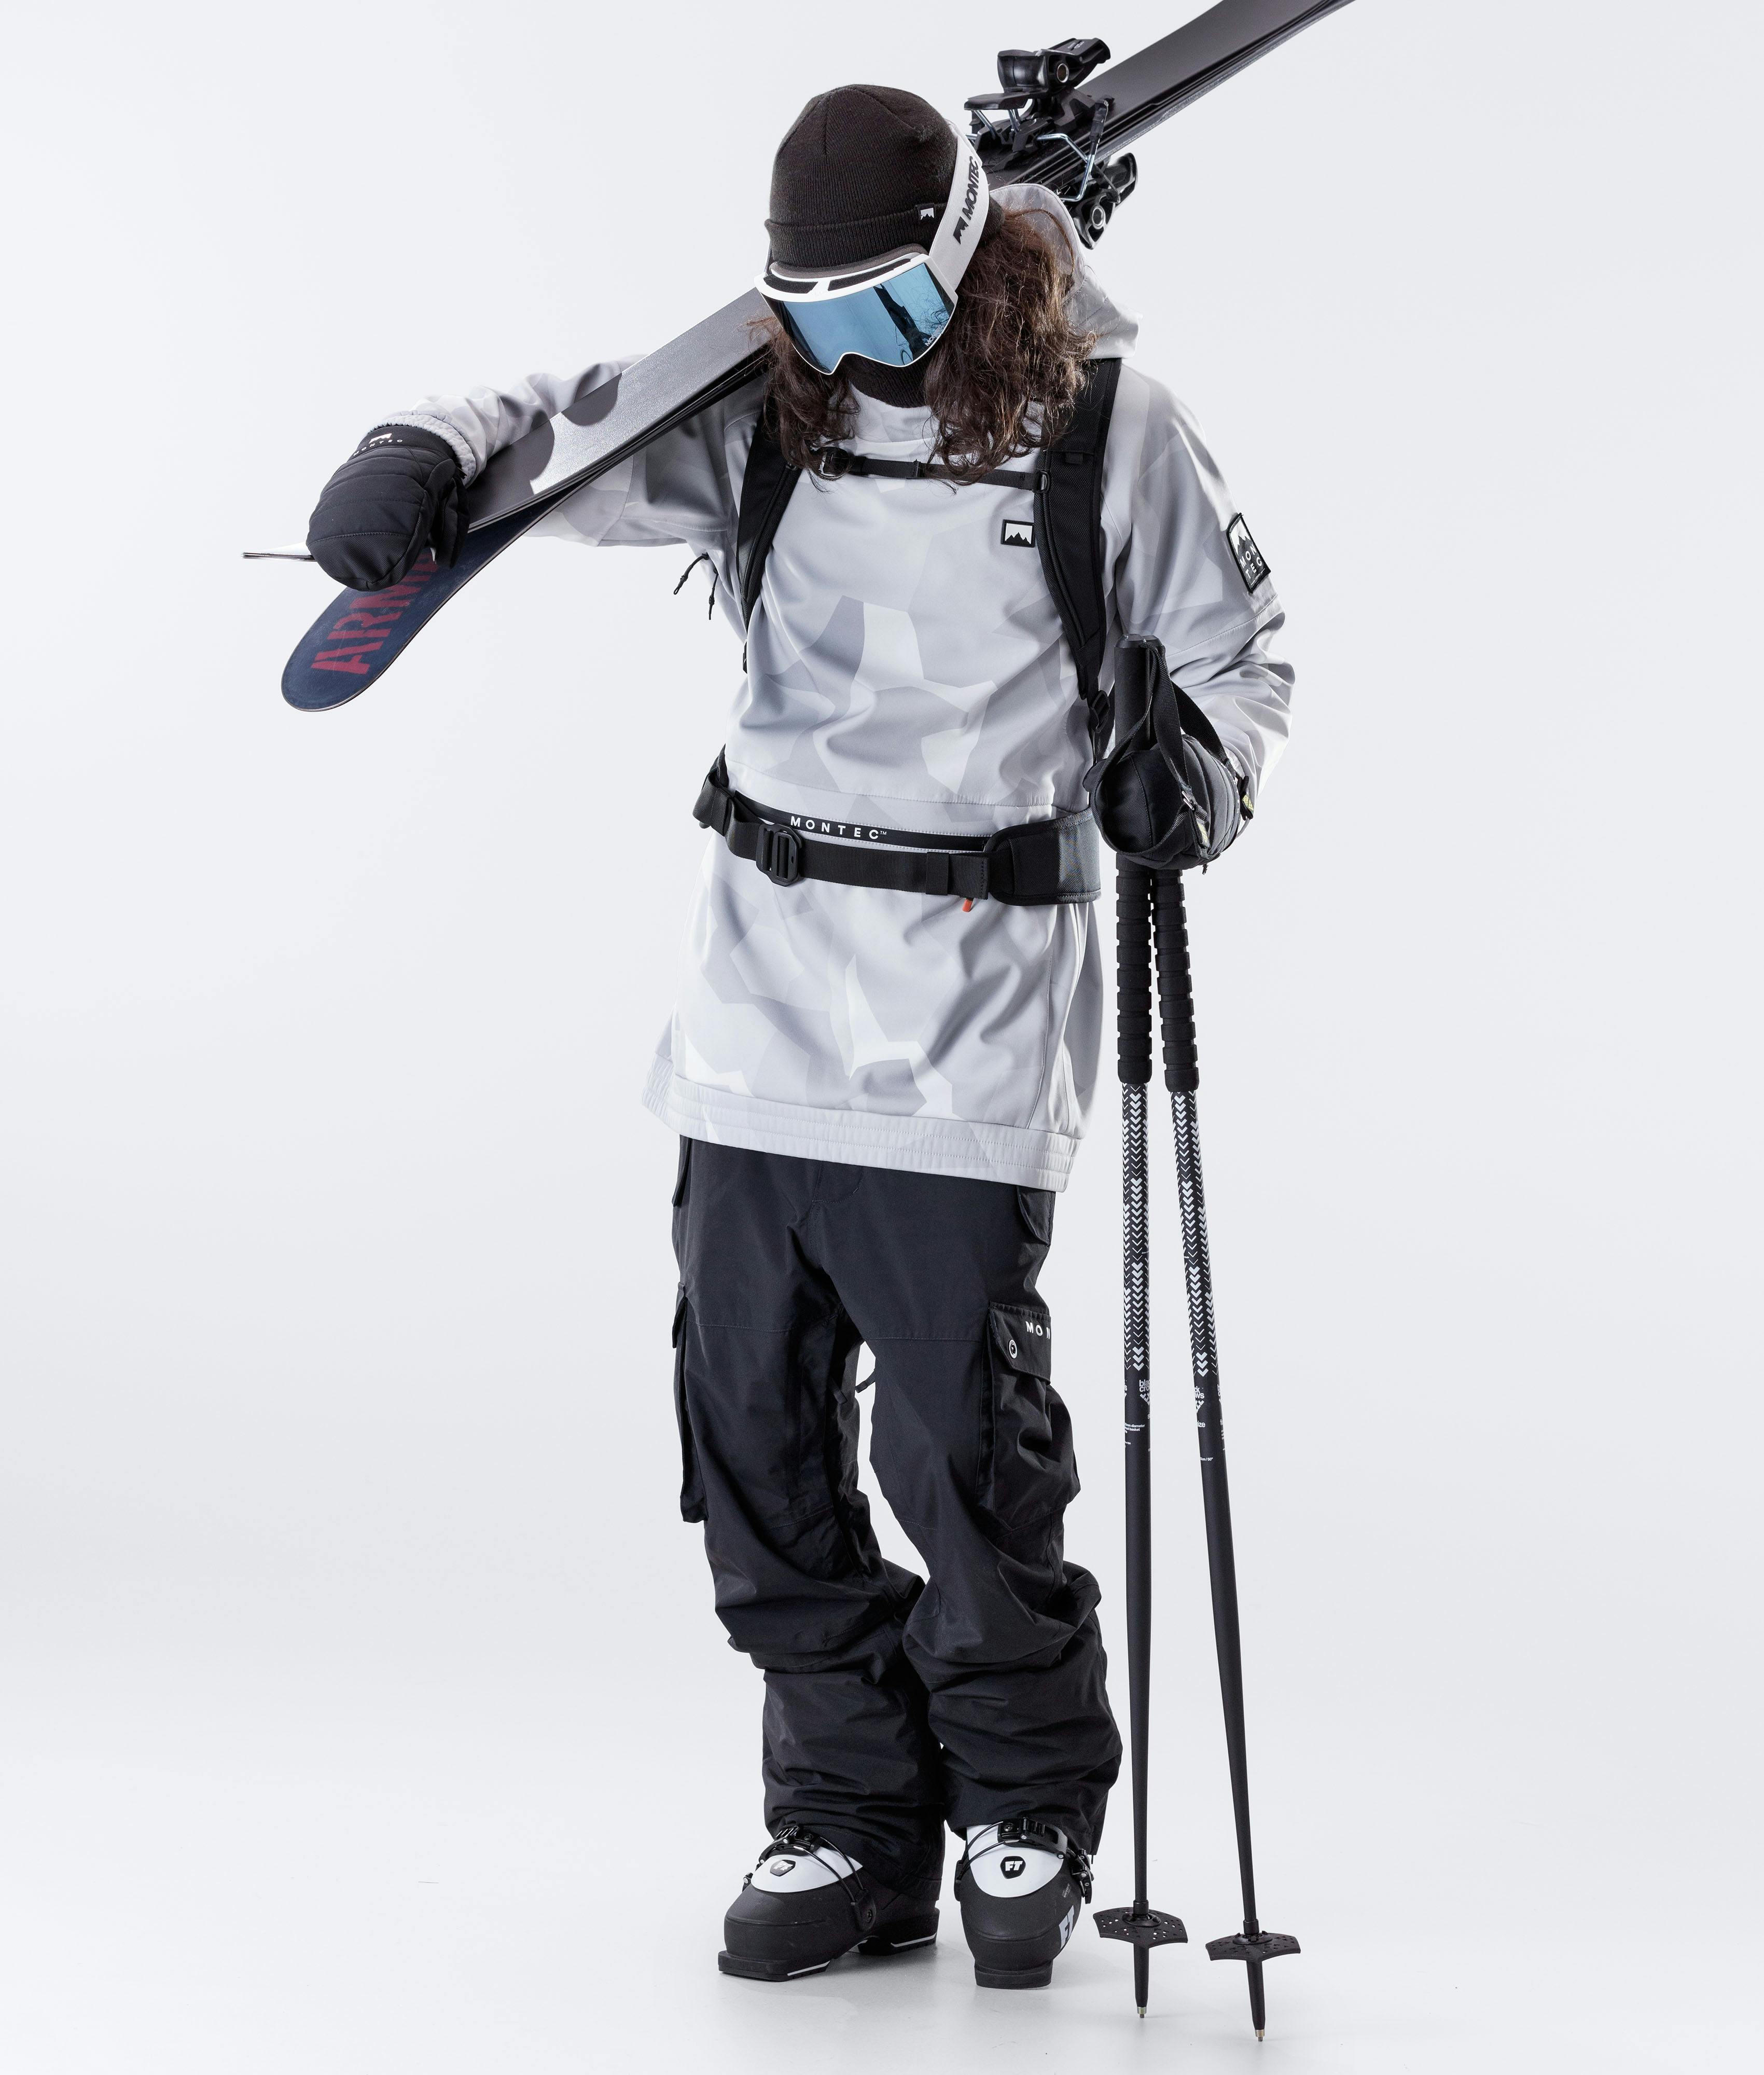 What is the difference between snowboarding and skiing pants?